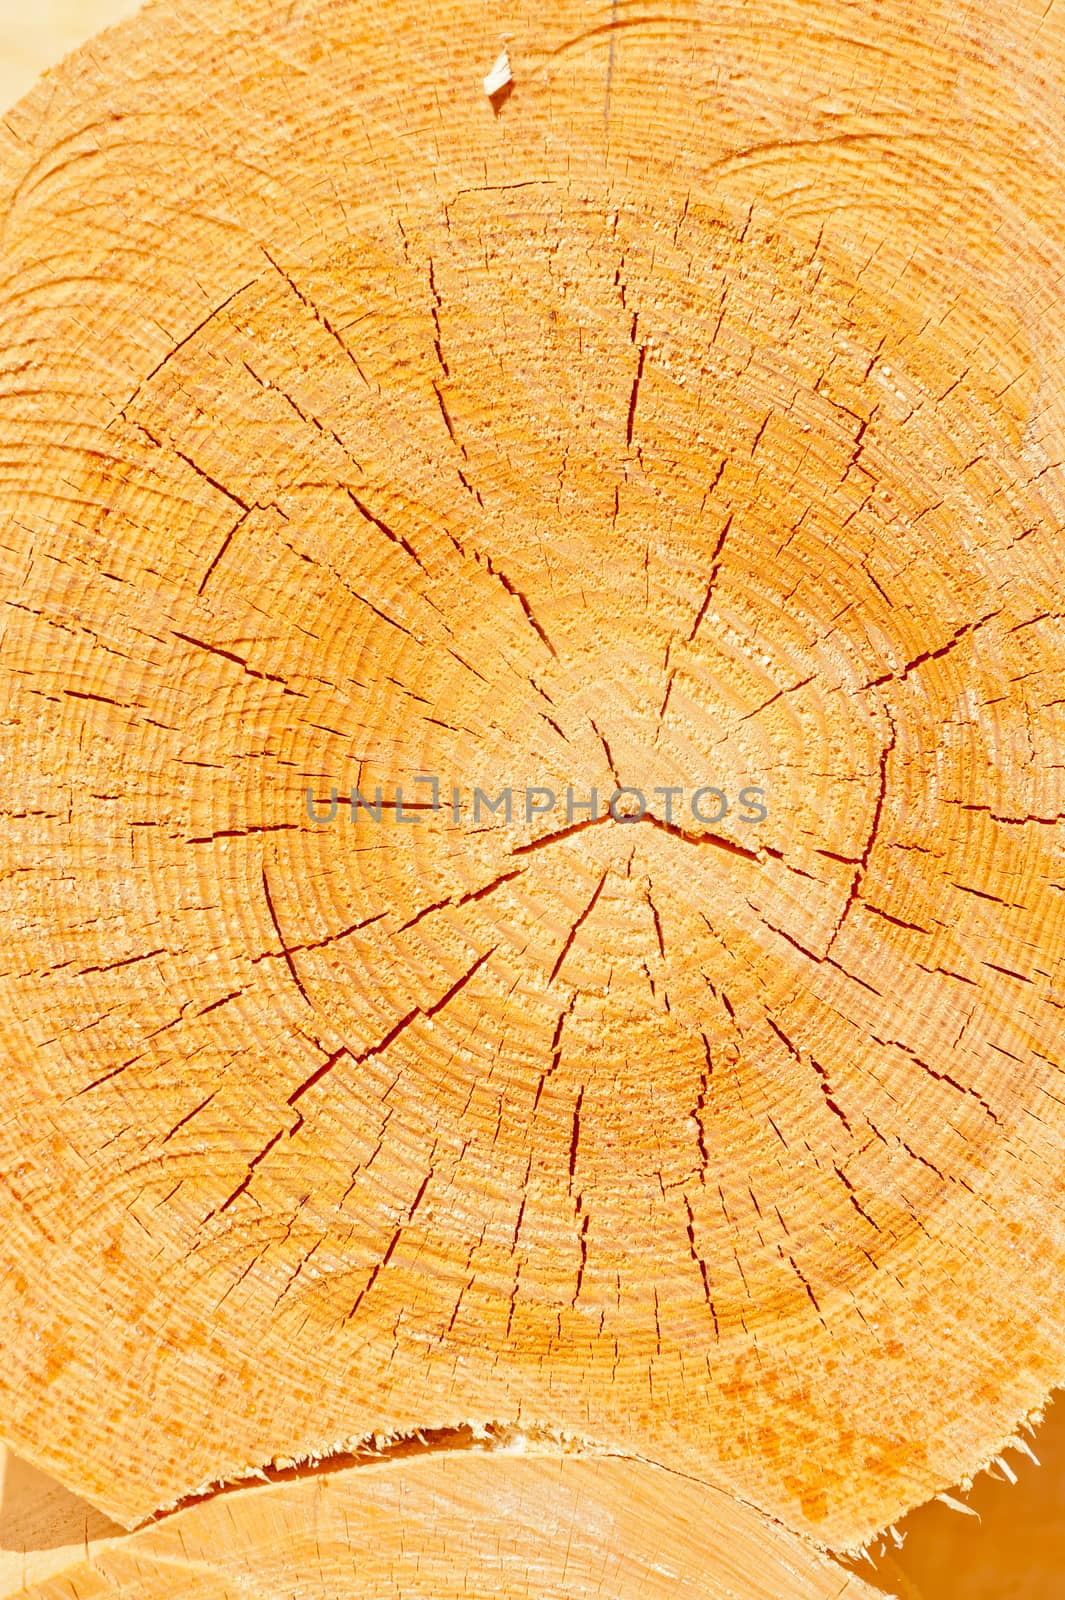 cross-section of a tree close up